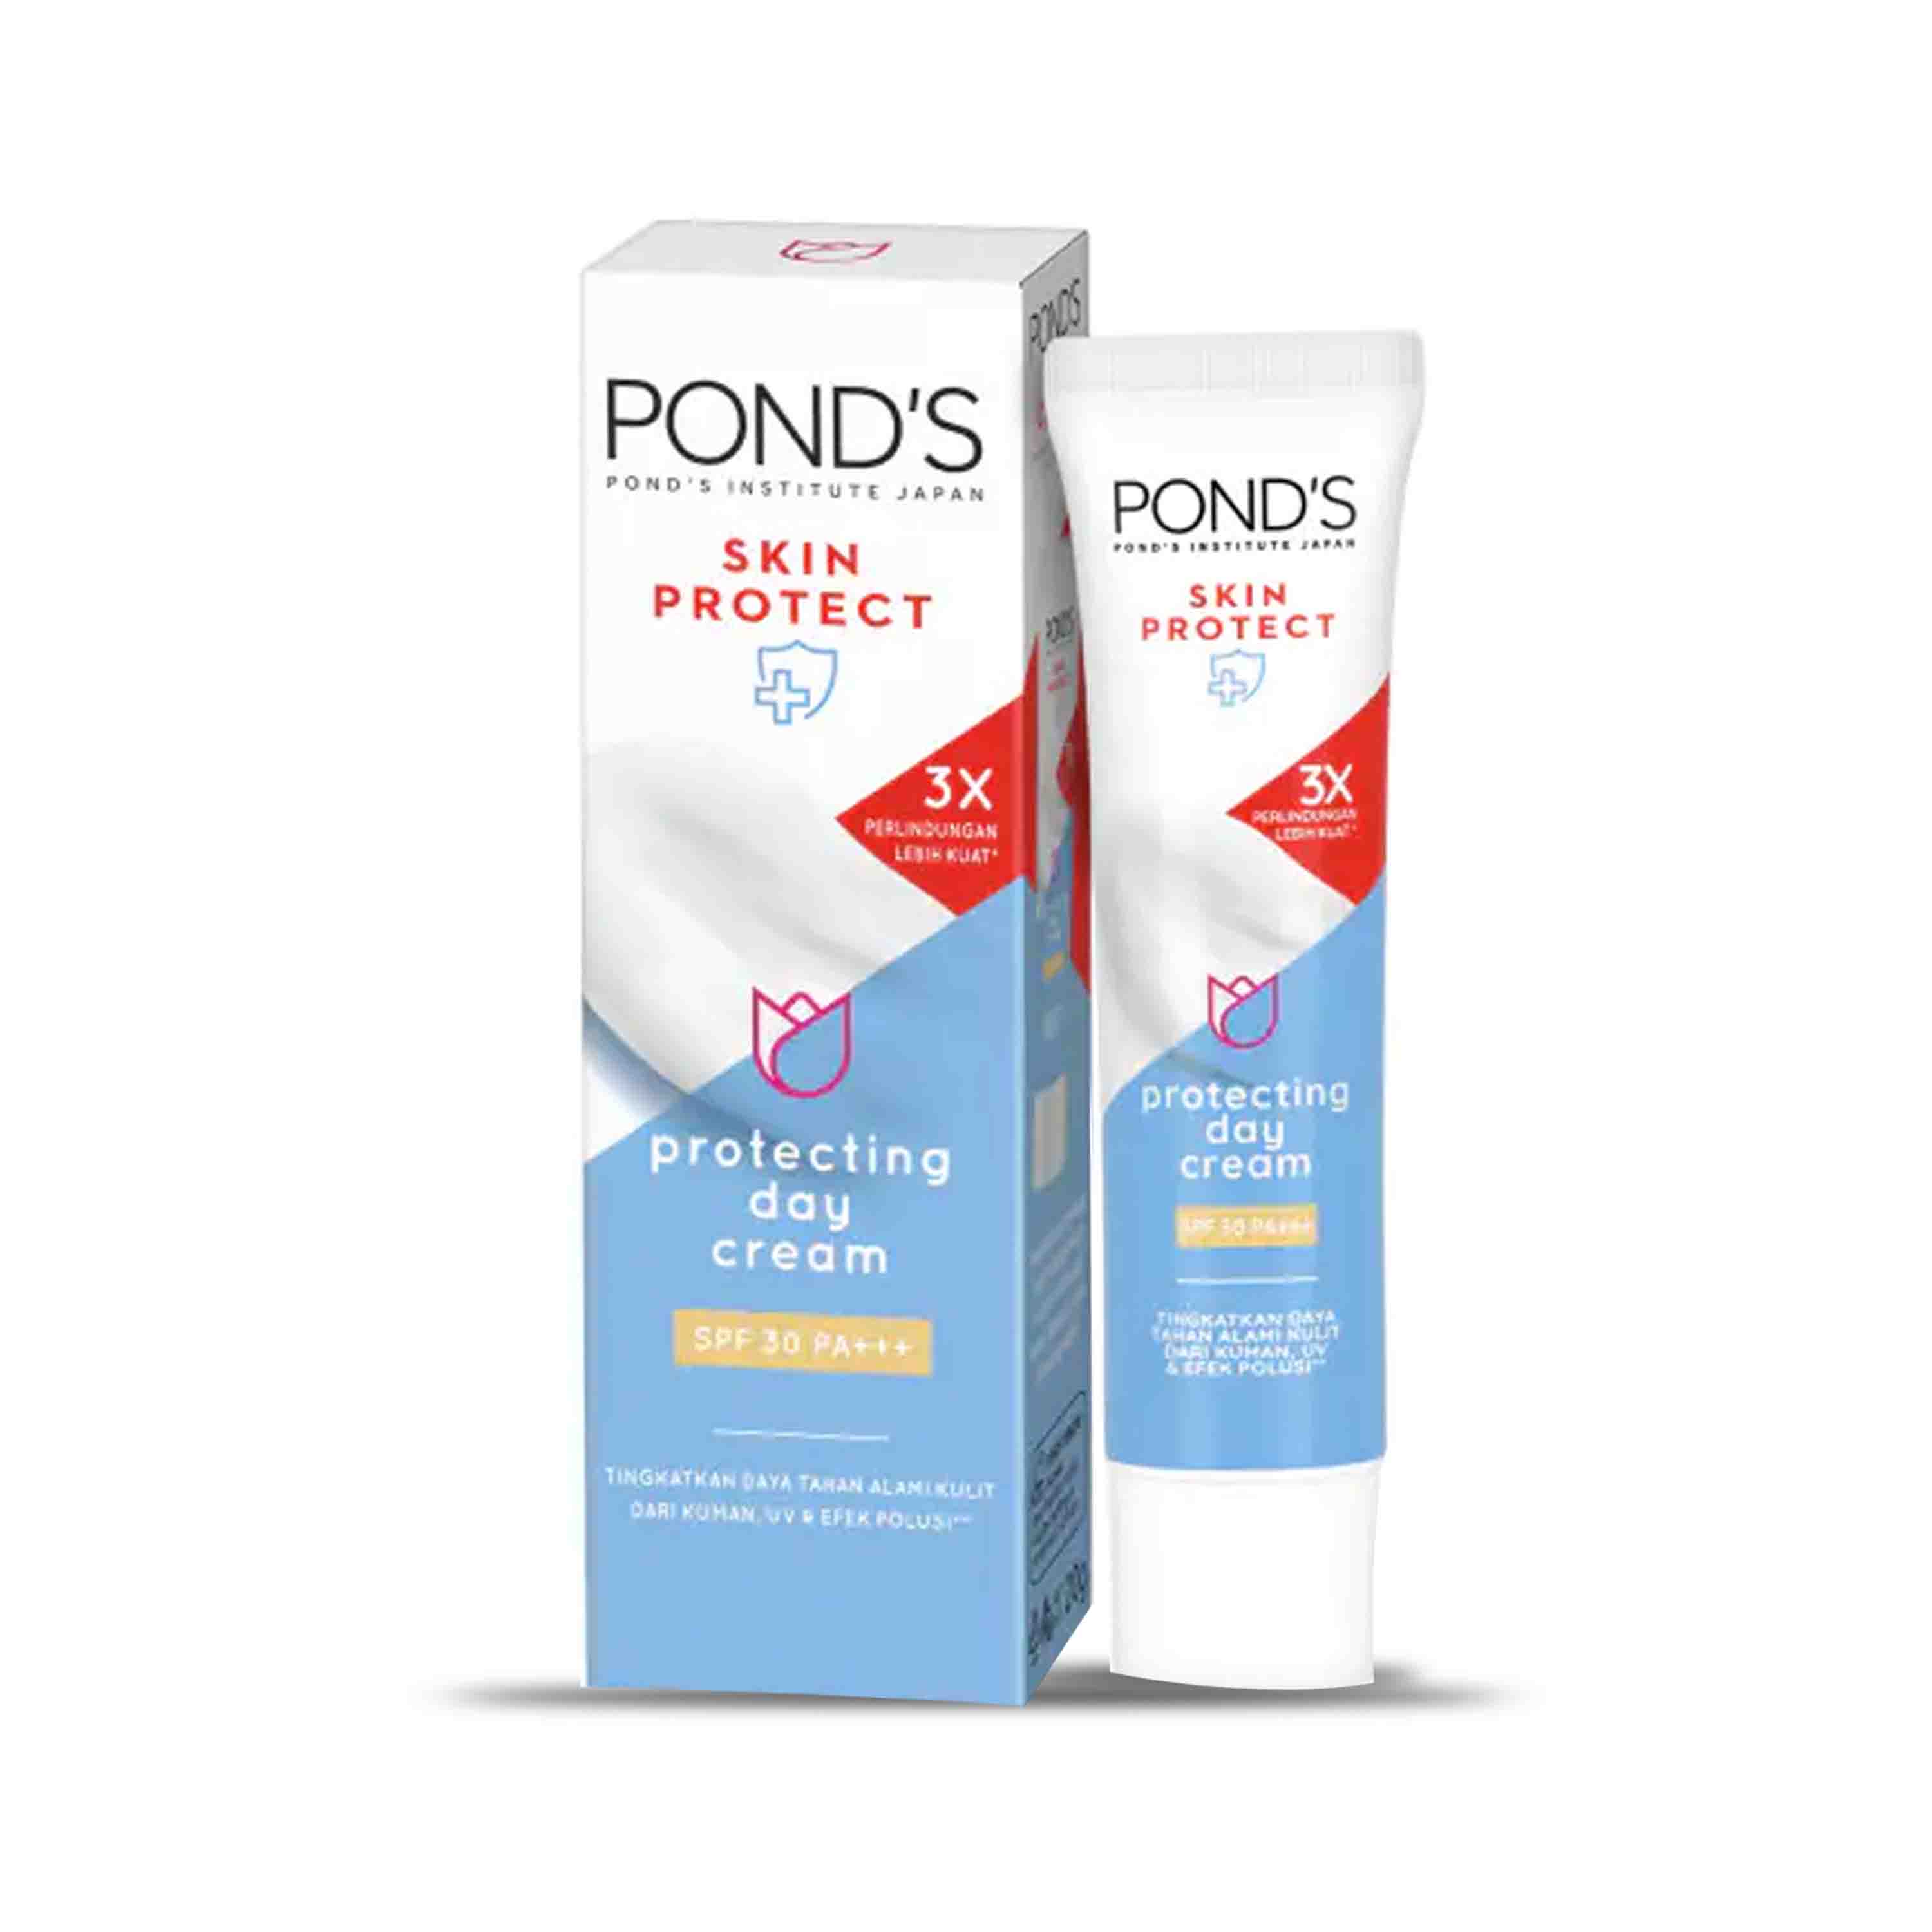 PONDS Skin Protect Protecting Day Cream Sunscreen SPF 30 PA 20 gr/ Ponds Anti Bacterial Day Cream